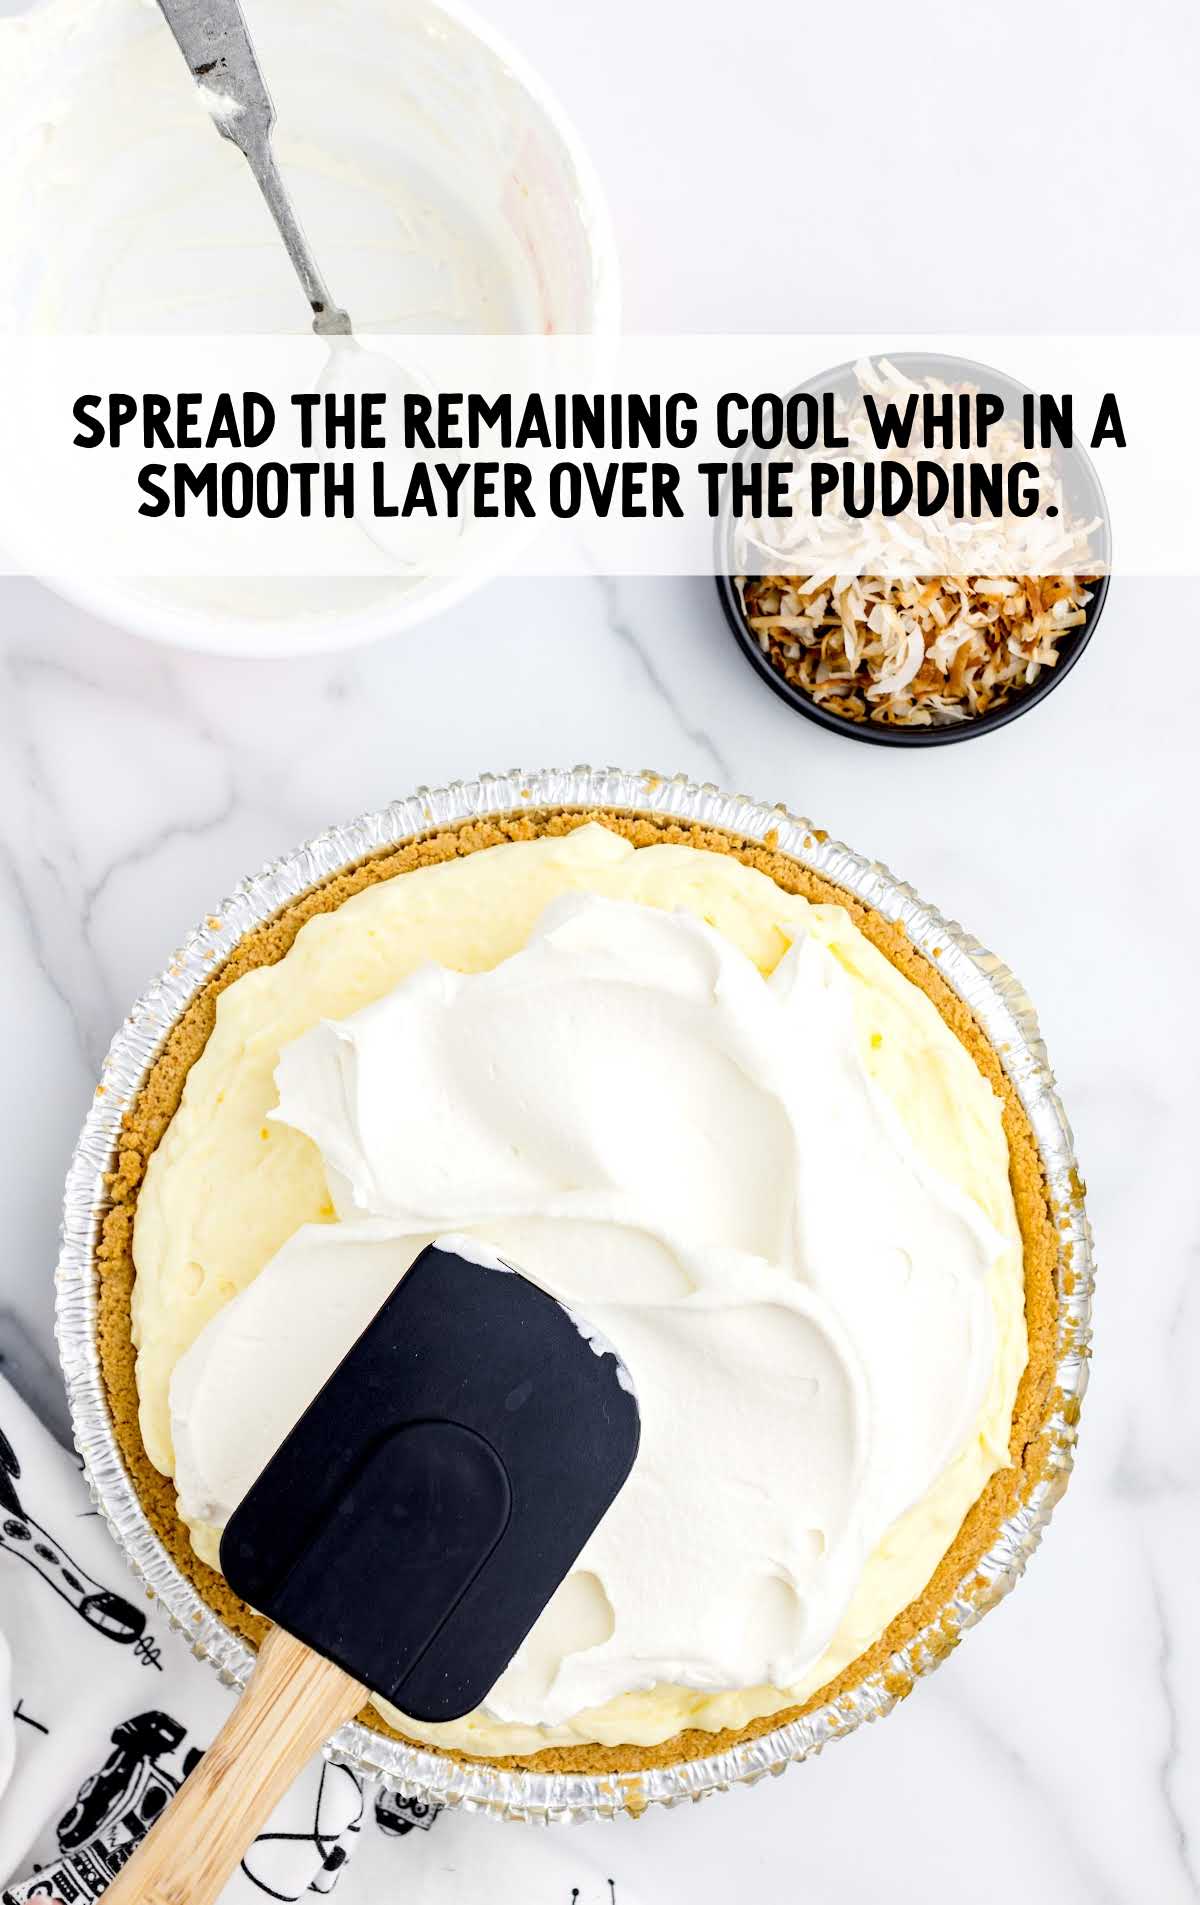 cool whipped spread over the pudding in a dish